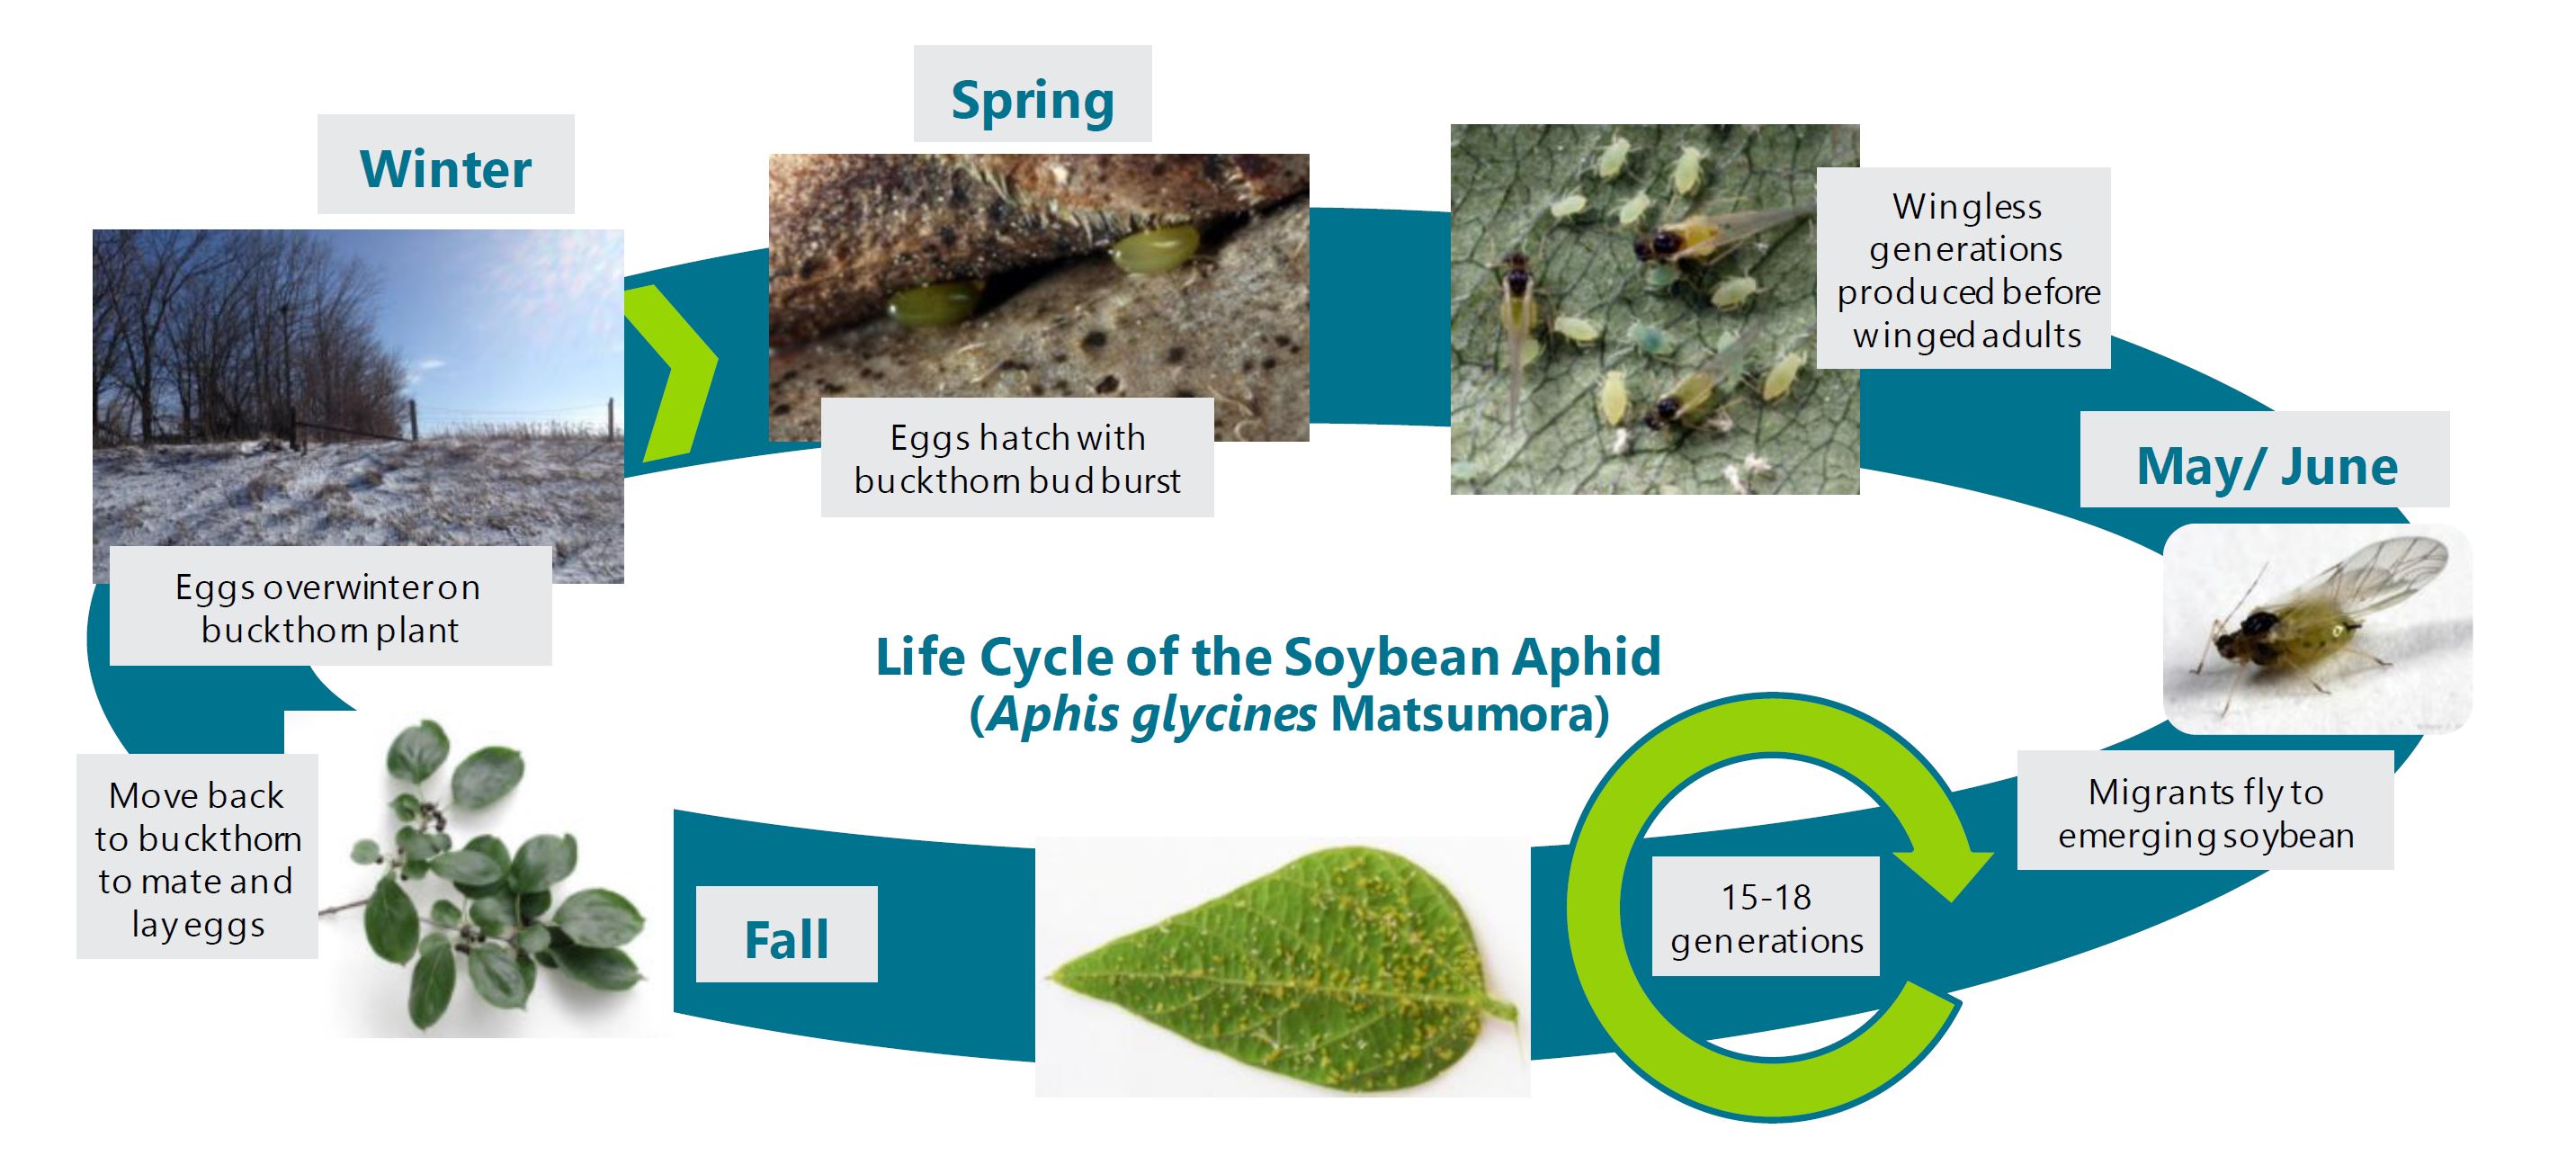 Life Cycle of the Soybean Aphid